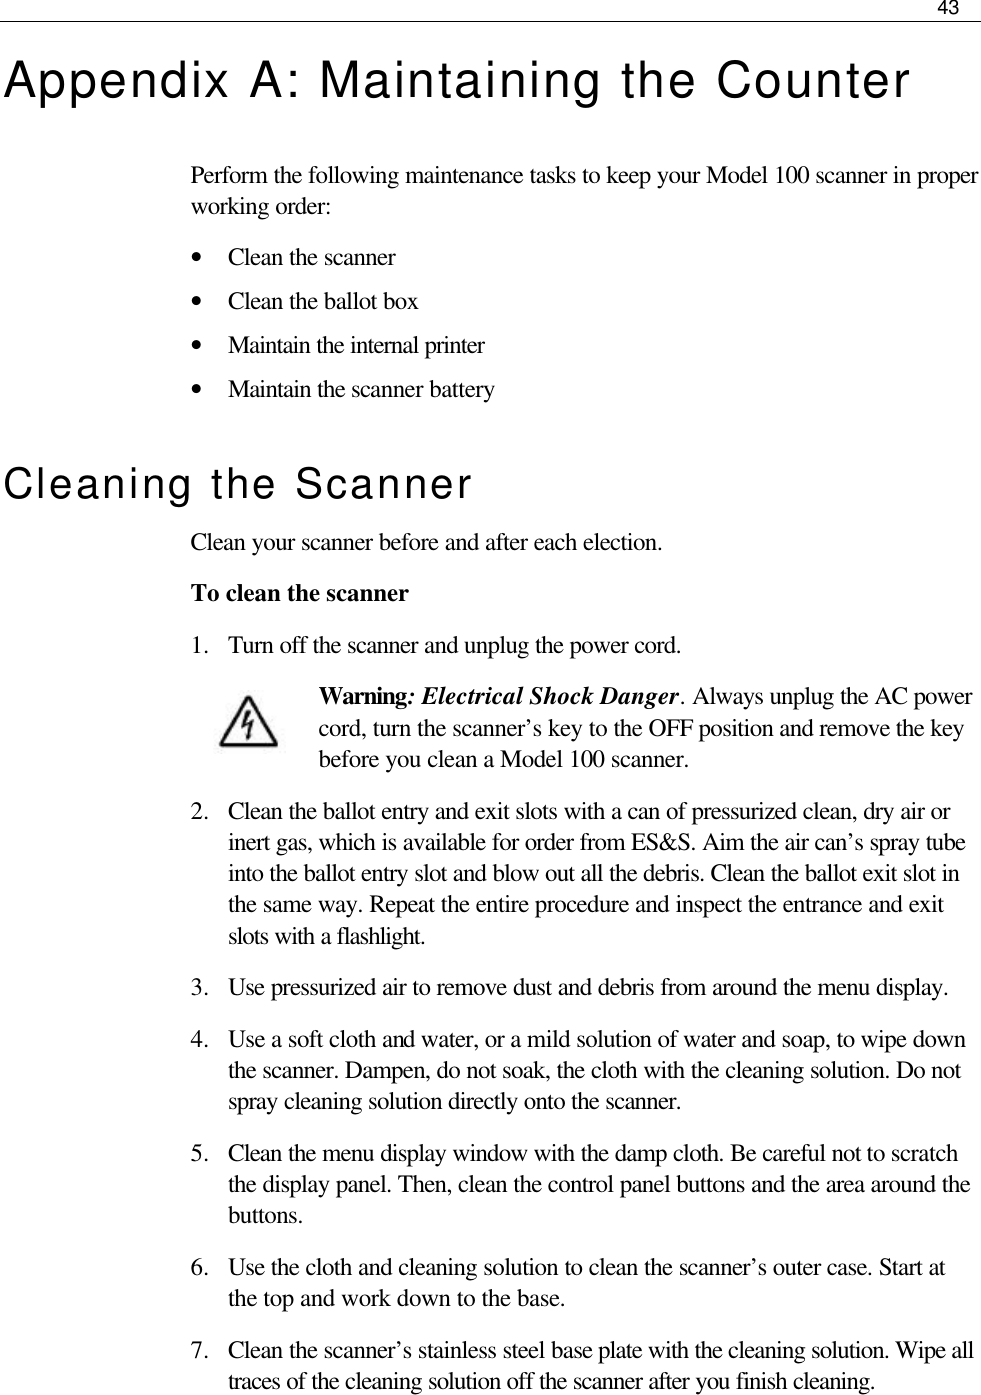     43  Appendix A: Maintaining the Counter Perform the following maintenance tasks to keep your Model 100 scanner in proper working order: • Clean the scanner • Clean the ballot box • Maintain the internal printer • Maintain the scanner battery Cleaning the Scanner Clean your scanner before and after each election.  To clean the scanner 1.  Turn off the scanner and unplug the power cord. Warning: Electrical Shock Danger. Always unplug the AC power cord, turn the scanner’s key to the OFF position and remove the key before you clean a Model 100 scanner. 2.  Clean the ballot entry and exit slots with a can of pressurized clean, dry air or inert gas, which is available for order from ES&amp;S. Aim the air can’s spray tube into the ballot entry slot and blow out all the debris. Clean the ballot exit slot in the same way. Repeat the entire procedure and inspect the entrance and exit slots with a flashlight. 3.  Use pressurized air to remove dust and debris from around the menu display. 4.  Use a soft cloth and water, or a mild solution of water and soap, to wipe down the scanner. Dampen, do not soak, the cloth with the cleaning solution. Do not spray cleaning solution directly onto the scanner.  5.  Clean the menu display window with the damp cloth. Be careful not to scratch the display panel. Then, clean the control panel buttons and the area around the buttons. 6.  Use the cloth and cleaning solution to clean the scanner’s outer case. Start at the top and work down to the base.  7.  Clean the scanner’s stainless steel base plate with the cleaning solution. Wipe all traces of the cleaning solution off the scanner after you finish cleaning.  